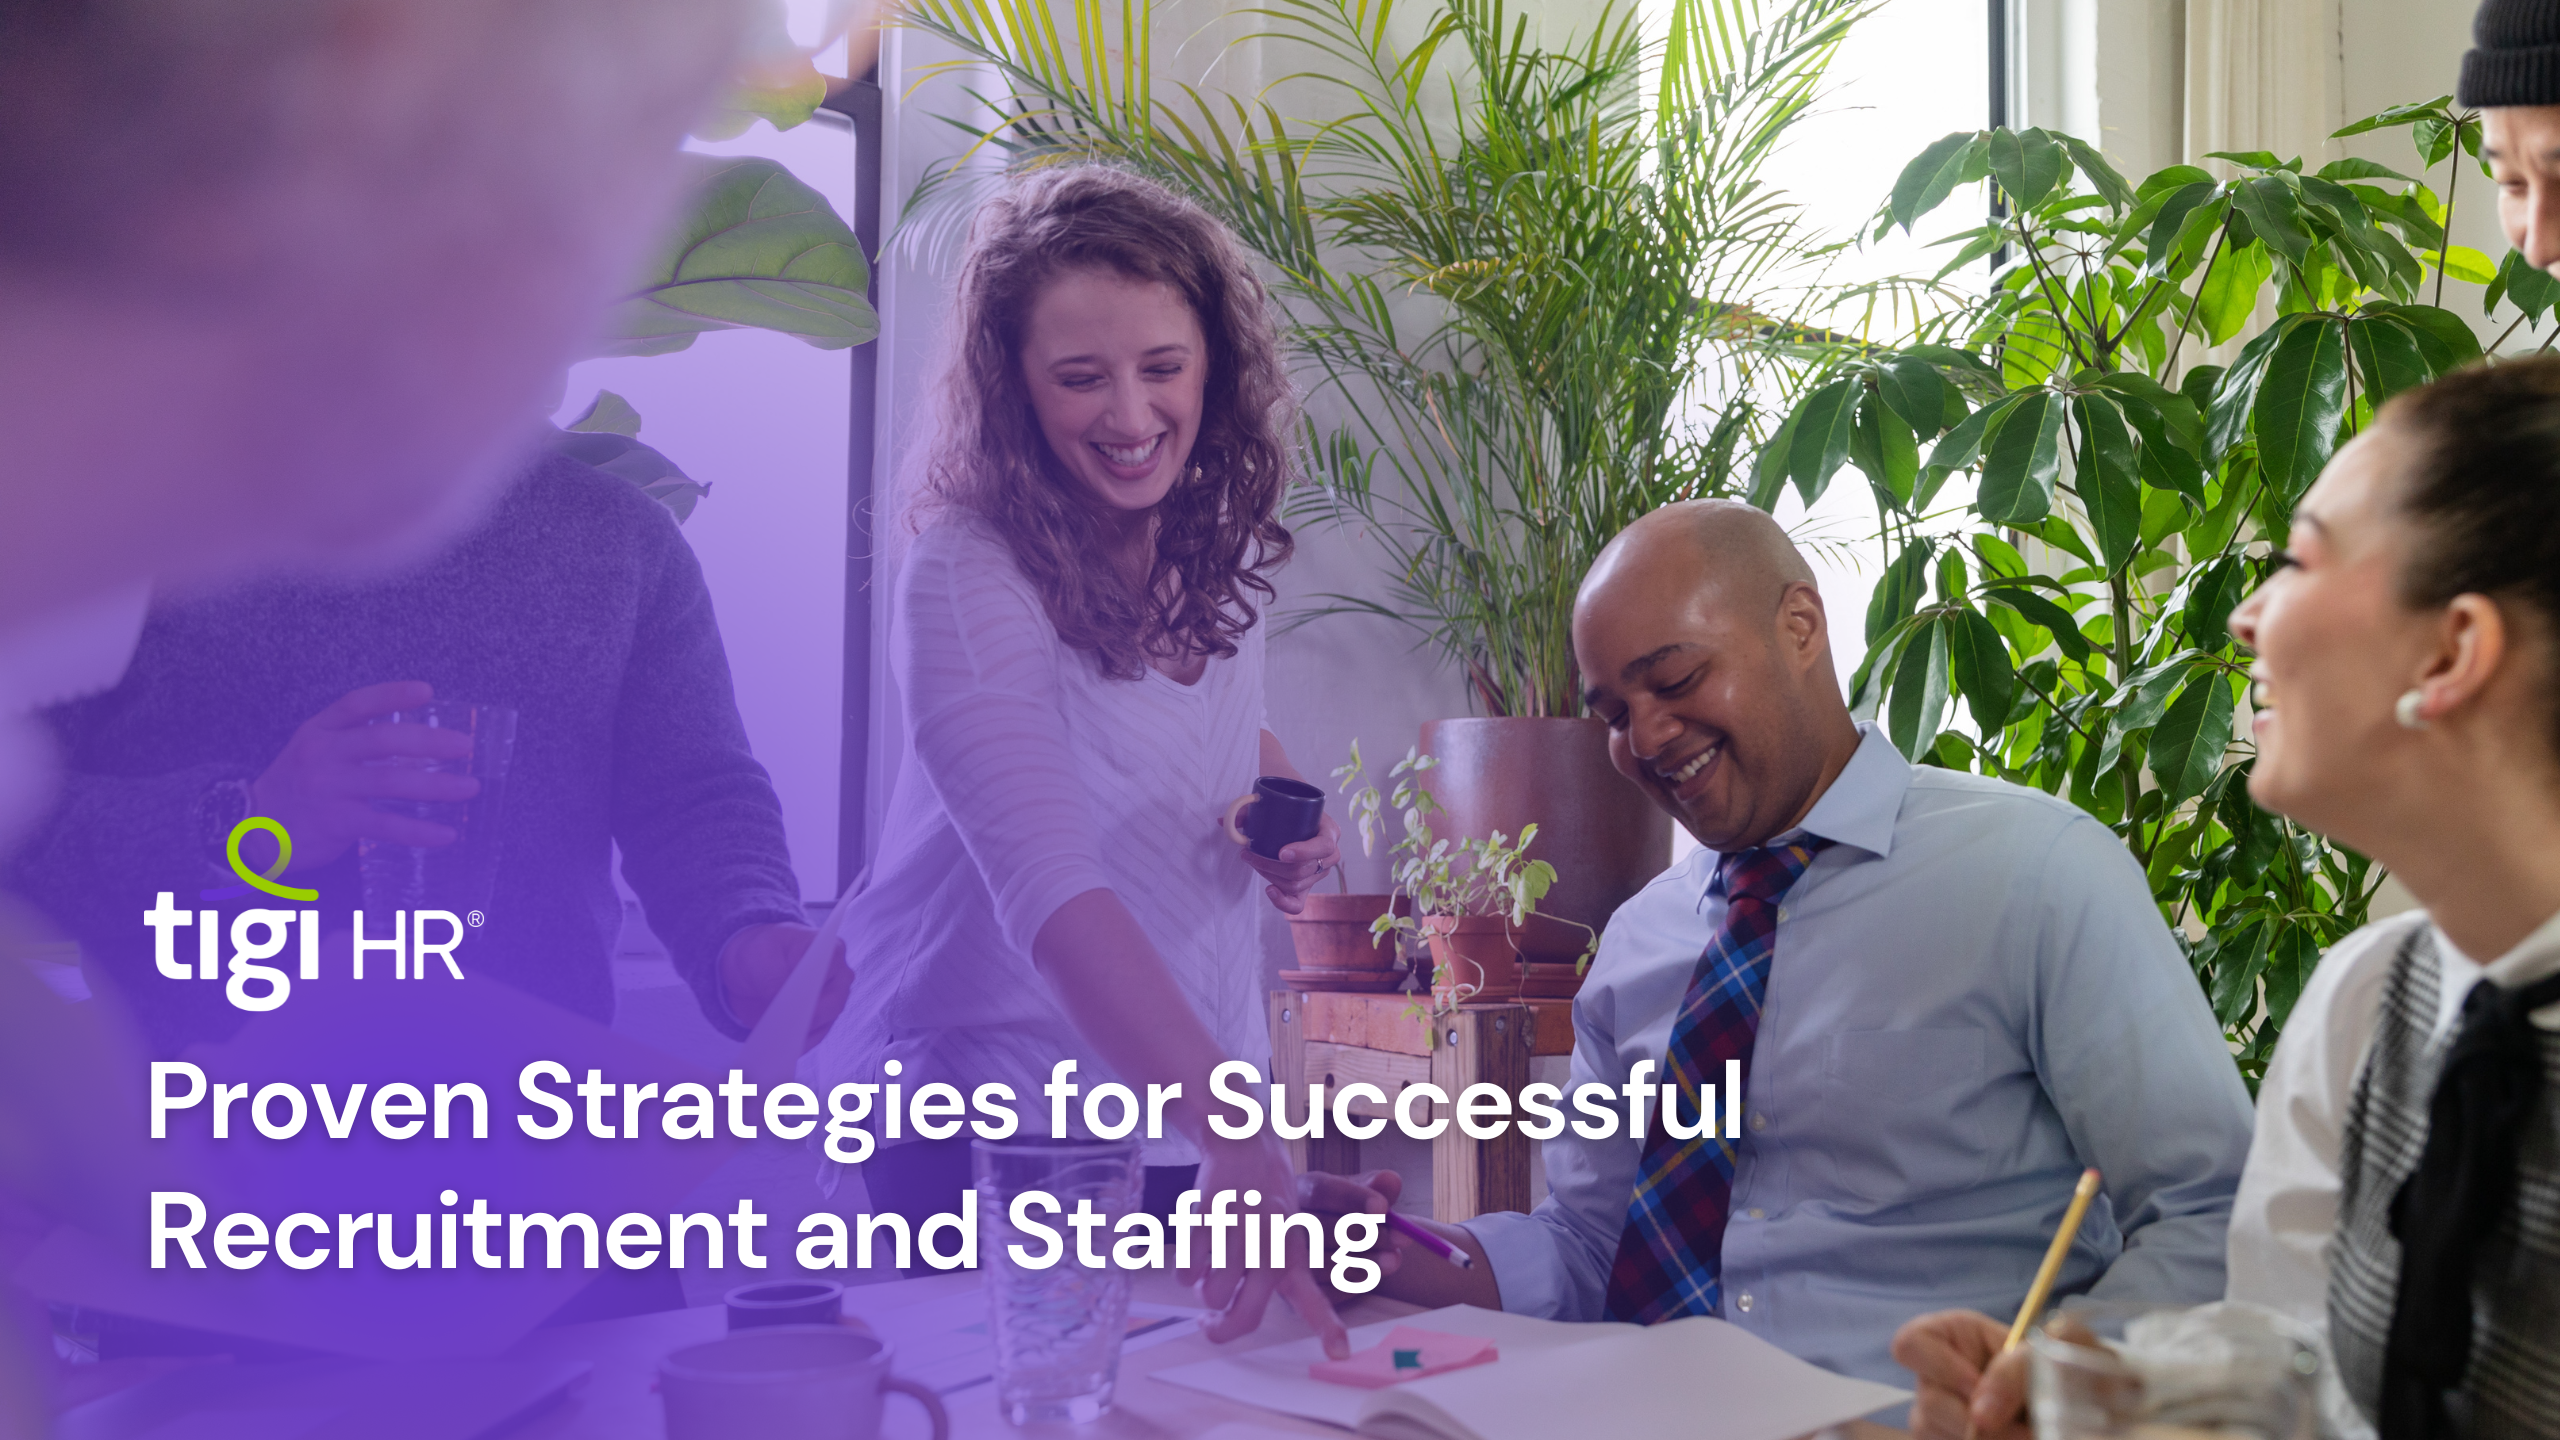 Successful Recruitment and Staffing